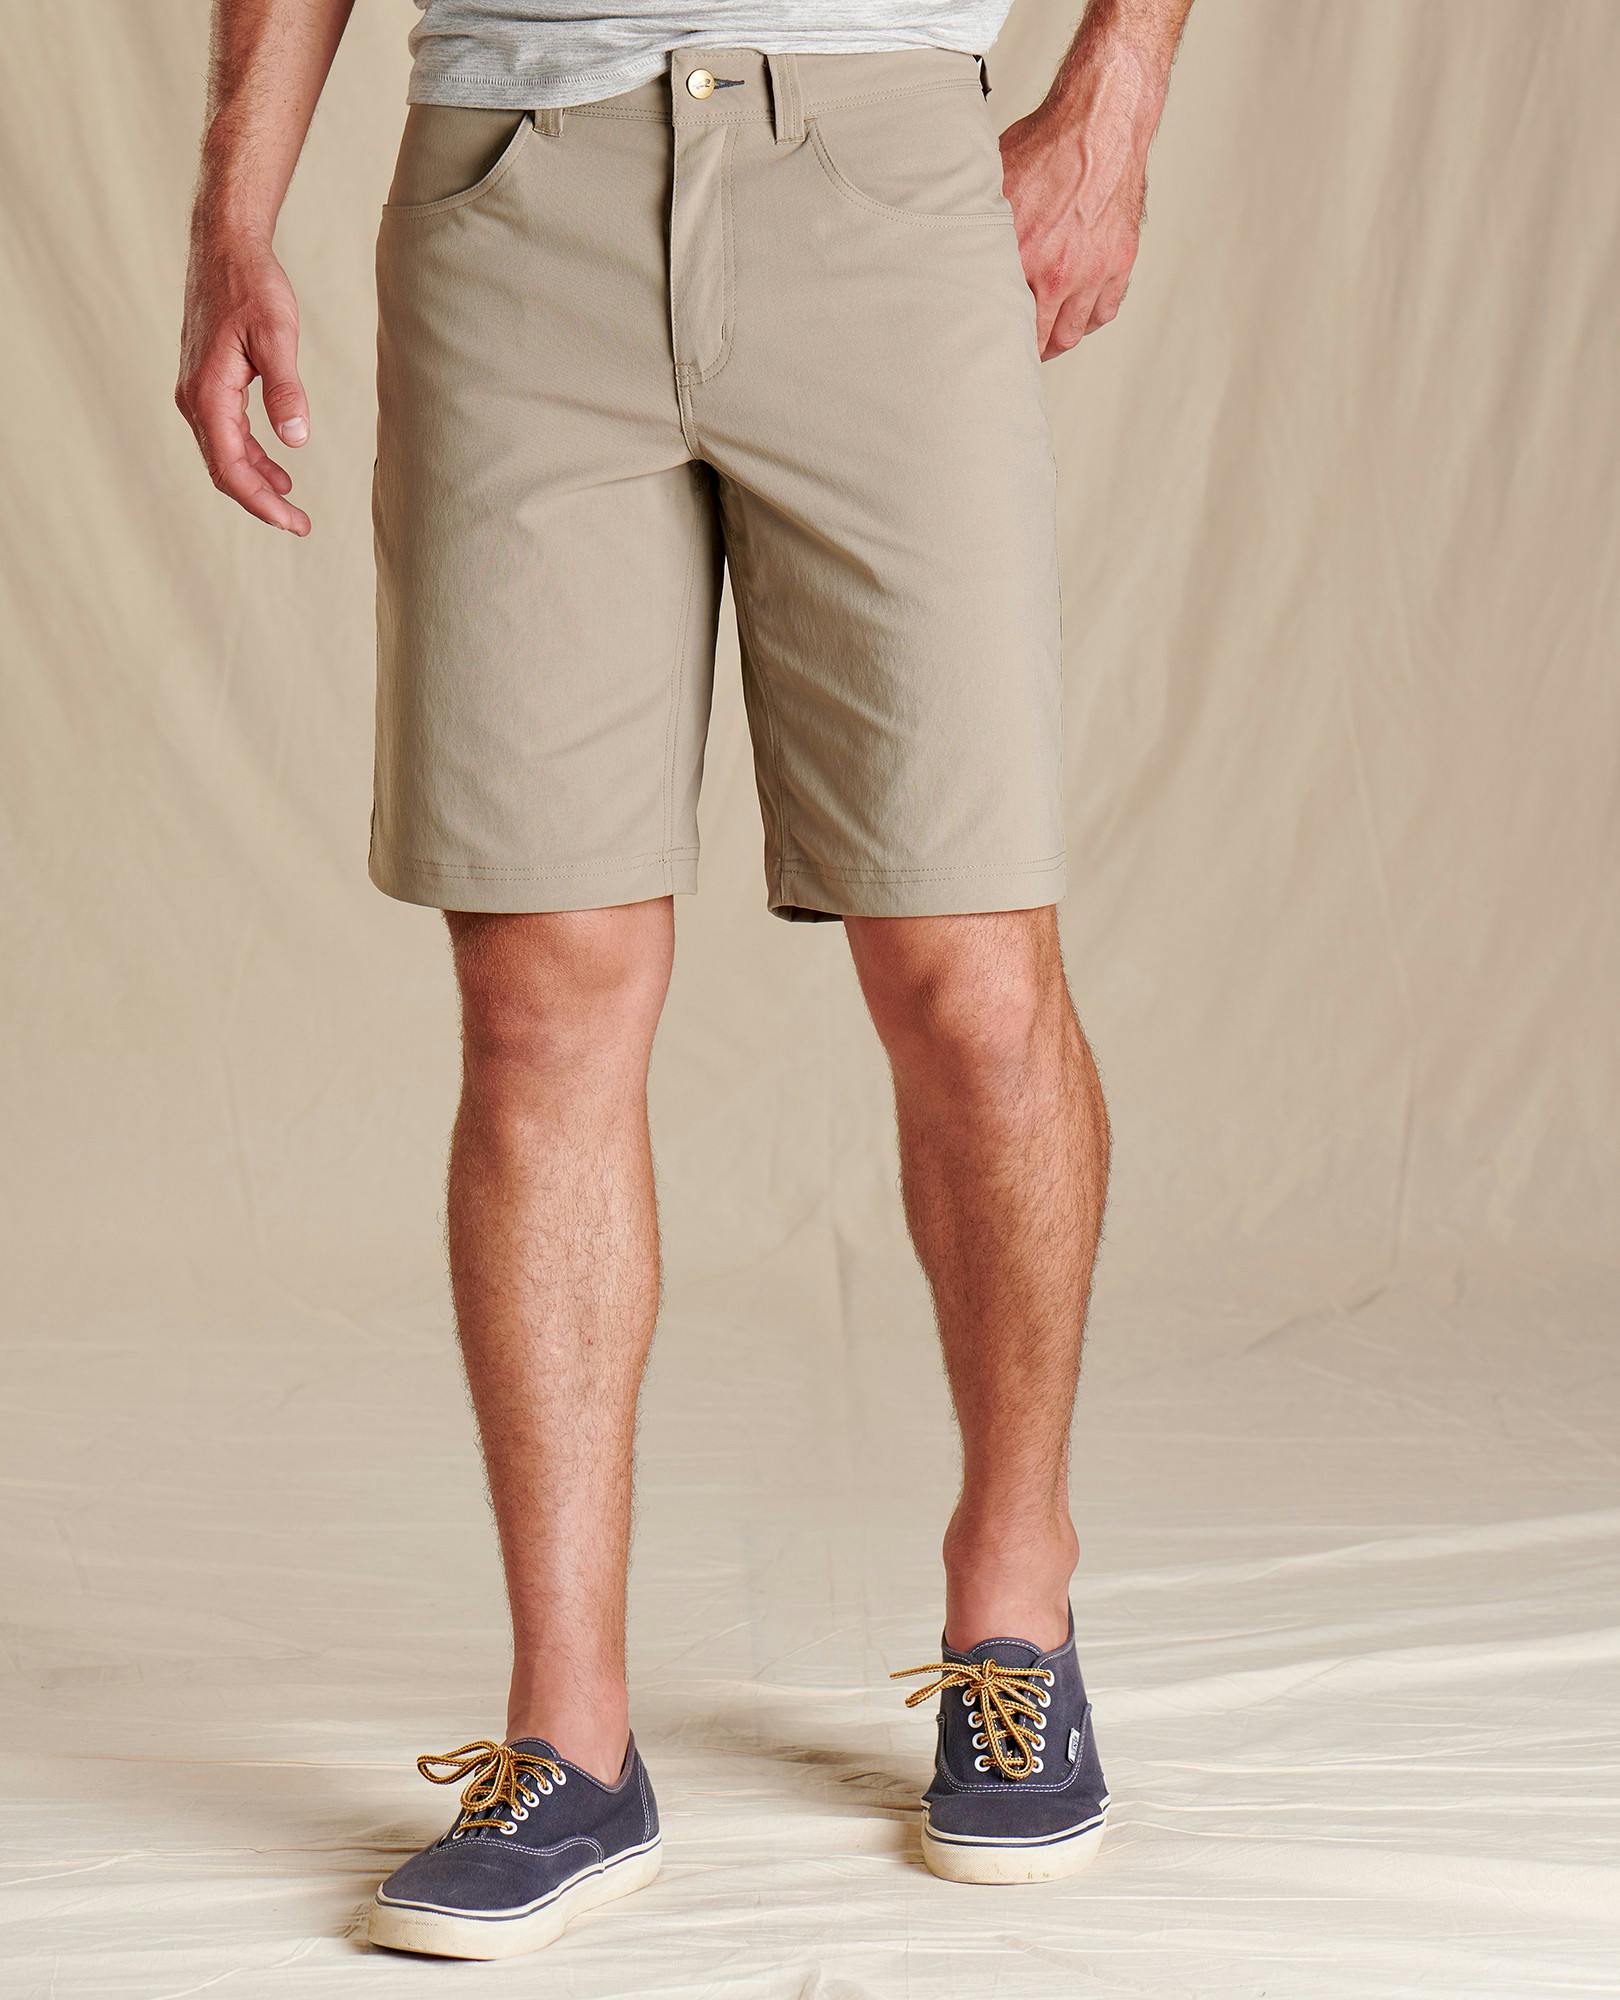 Toad&Co - Men's Rover Canvas Shorts